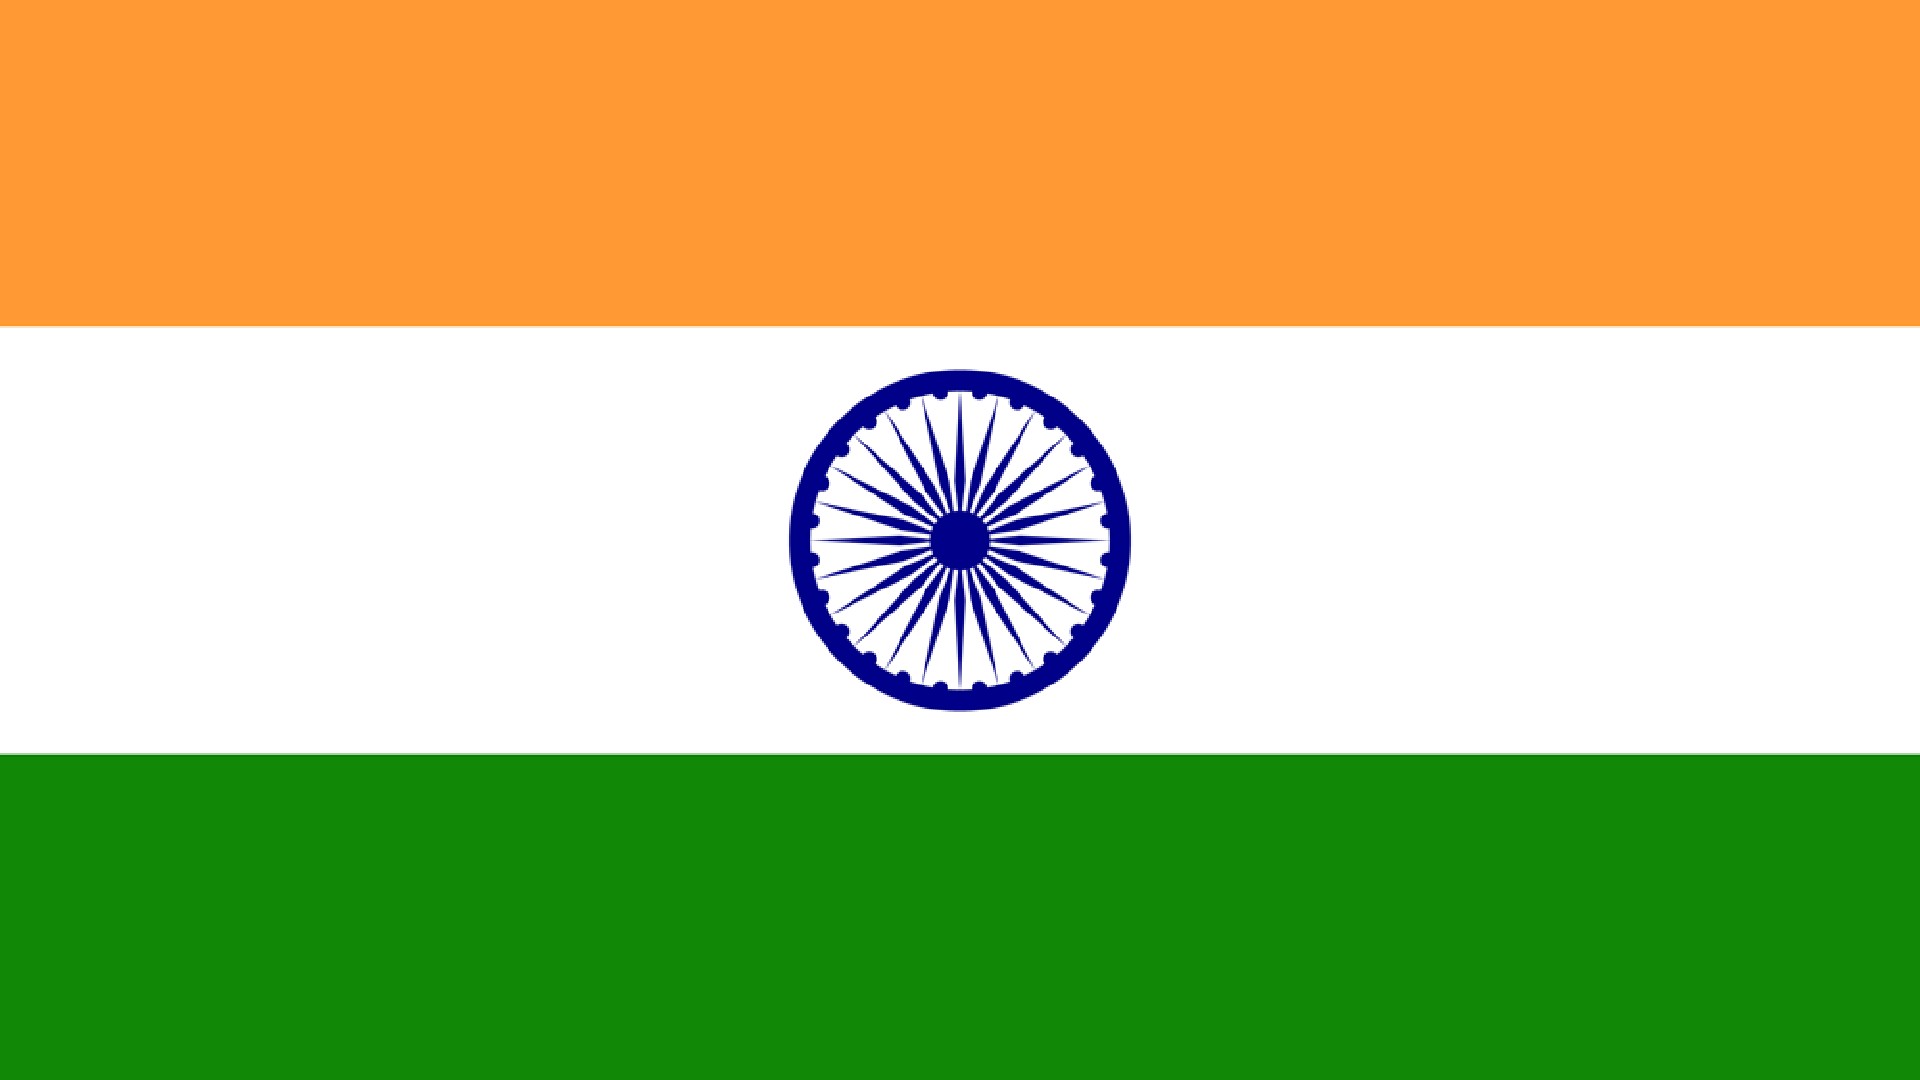 An image of the flag of India